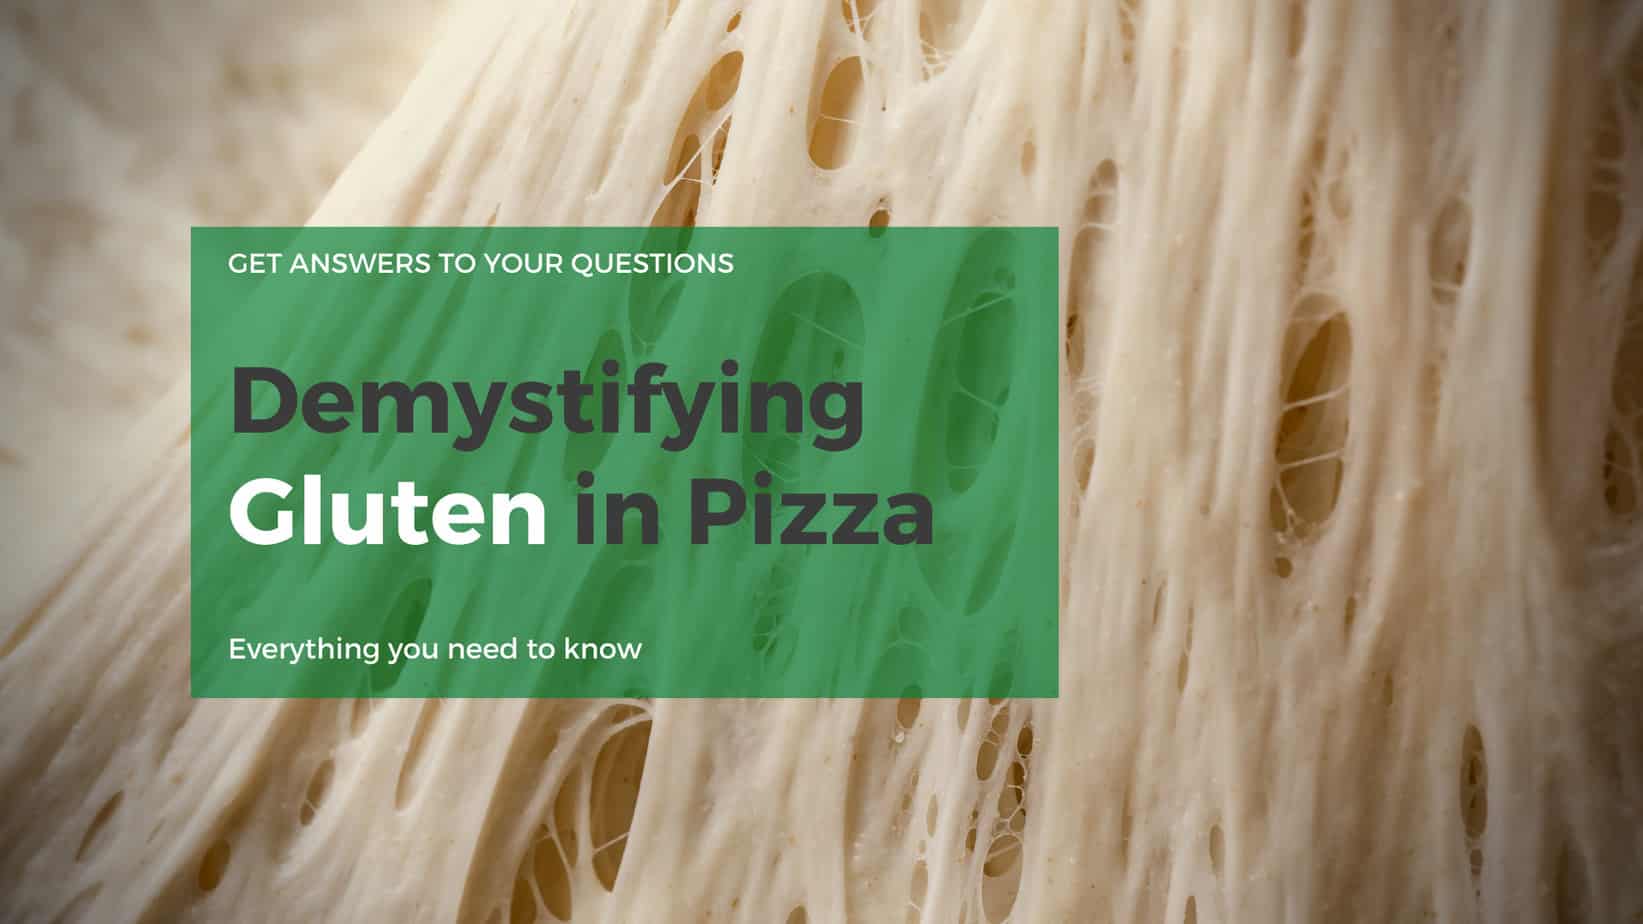 Demystifying Gluten in Pizza. Here’s What You Need to Know